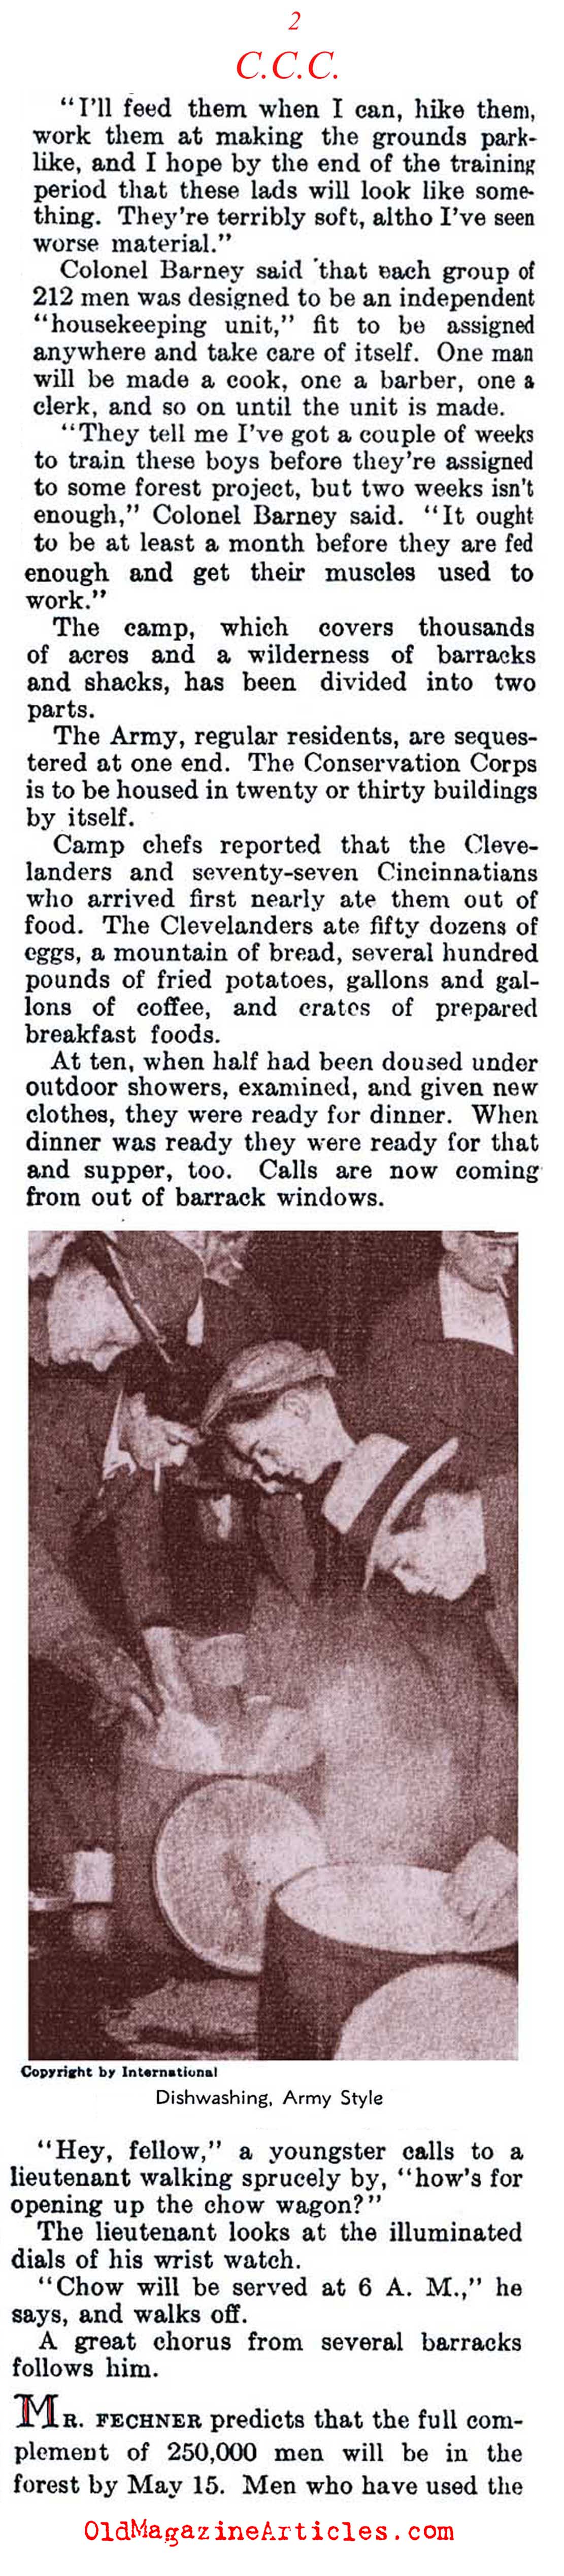 Public Relief for Young Men  (Literary Digest, 1933)